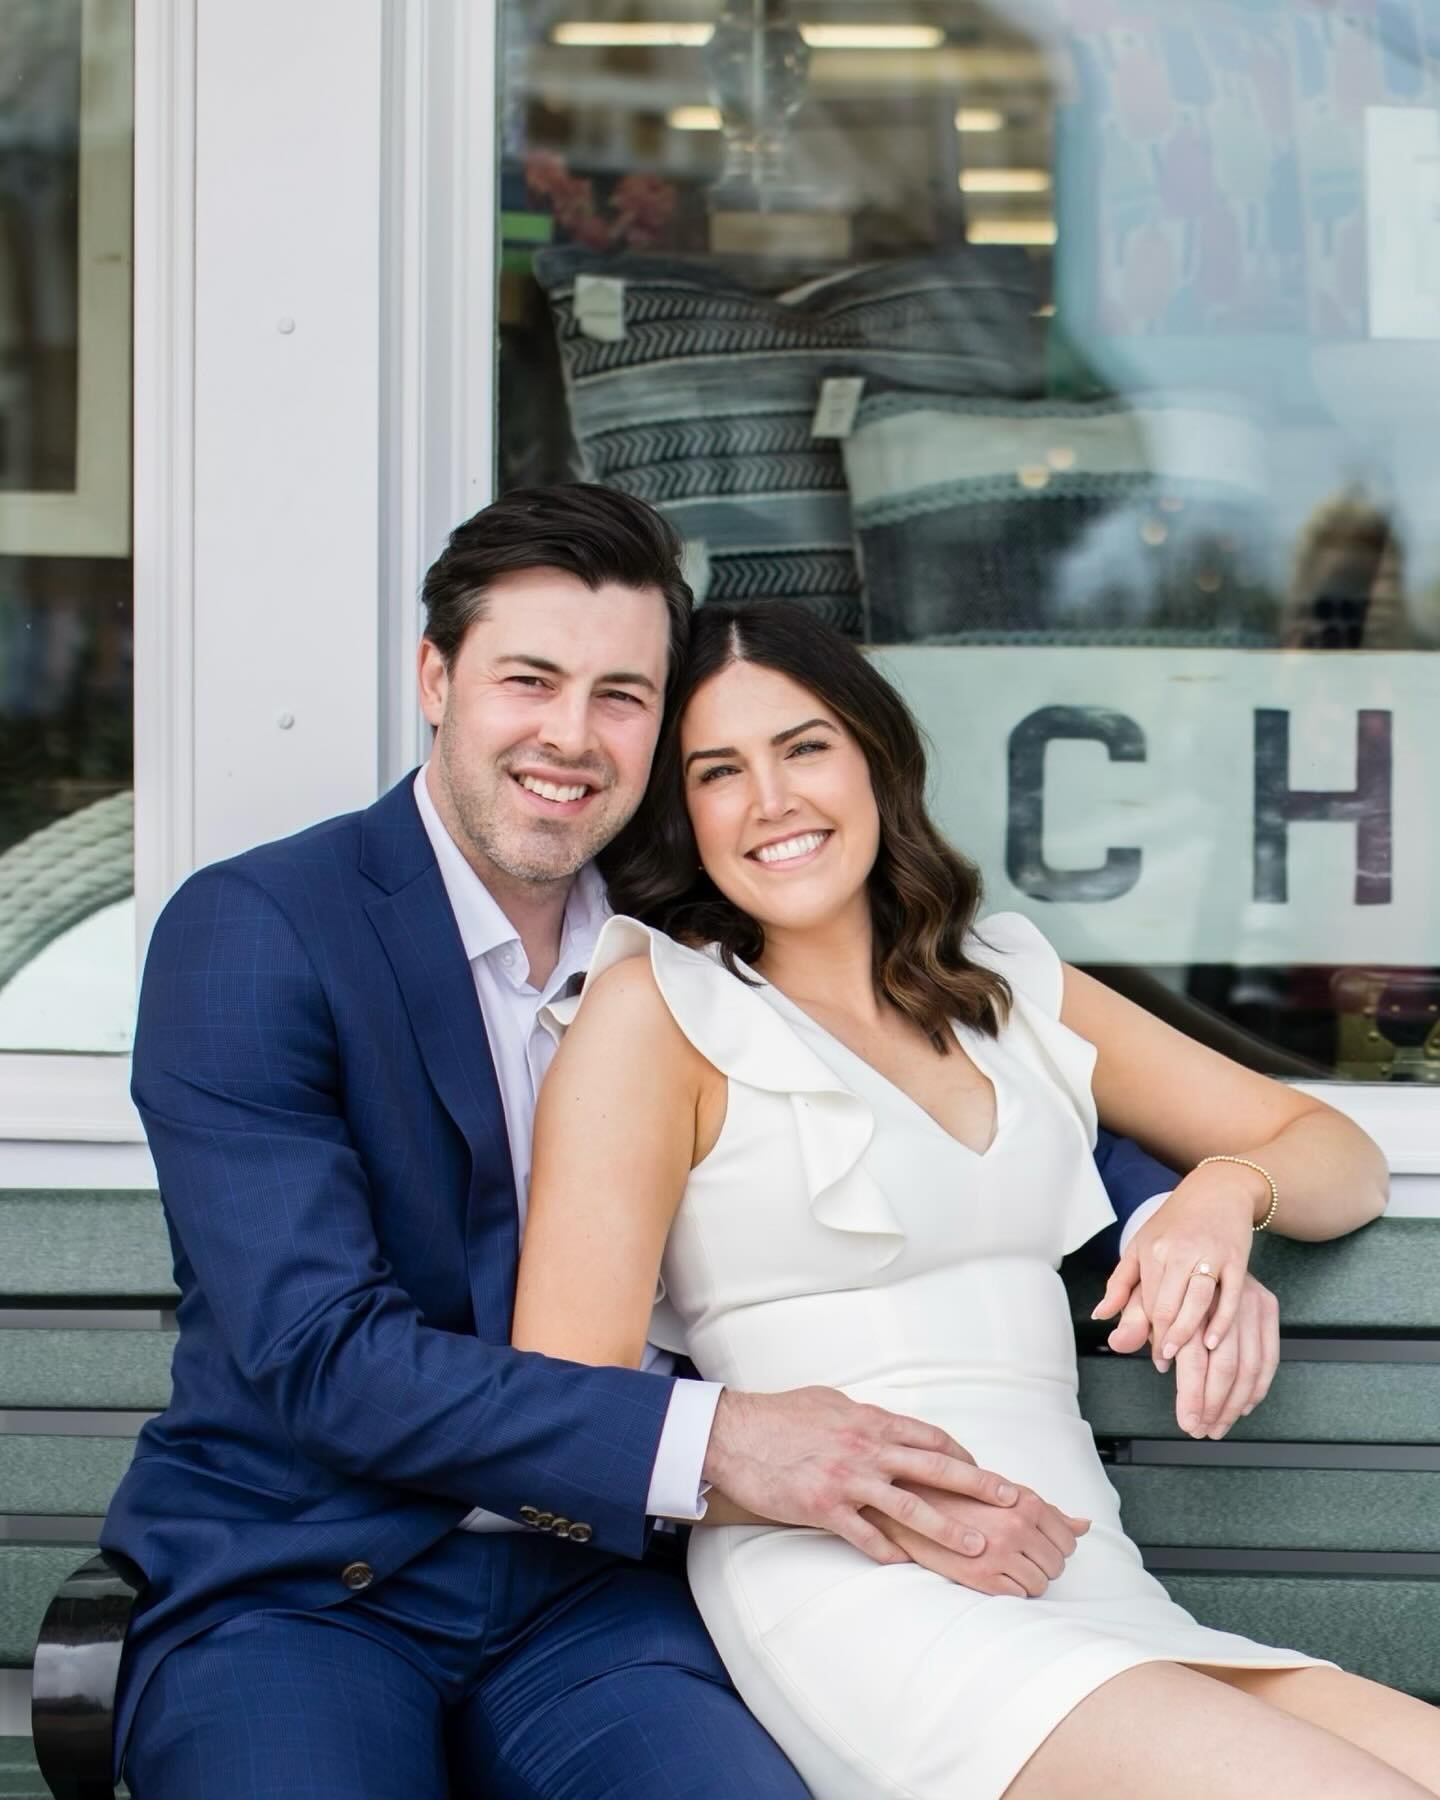 C&amp;G 🤍 This amazing couple is going to tie the knot at @chathambarsinn in July! How sweet was their downtown Chatham/Beach engagement session!? 

The countdown is on!